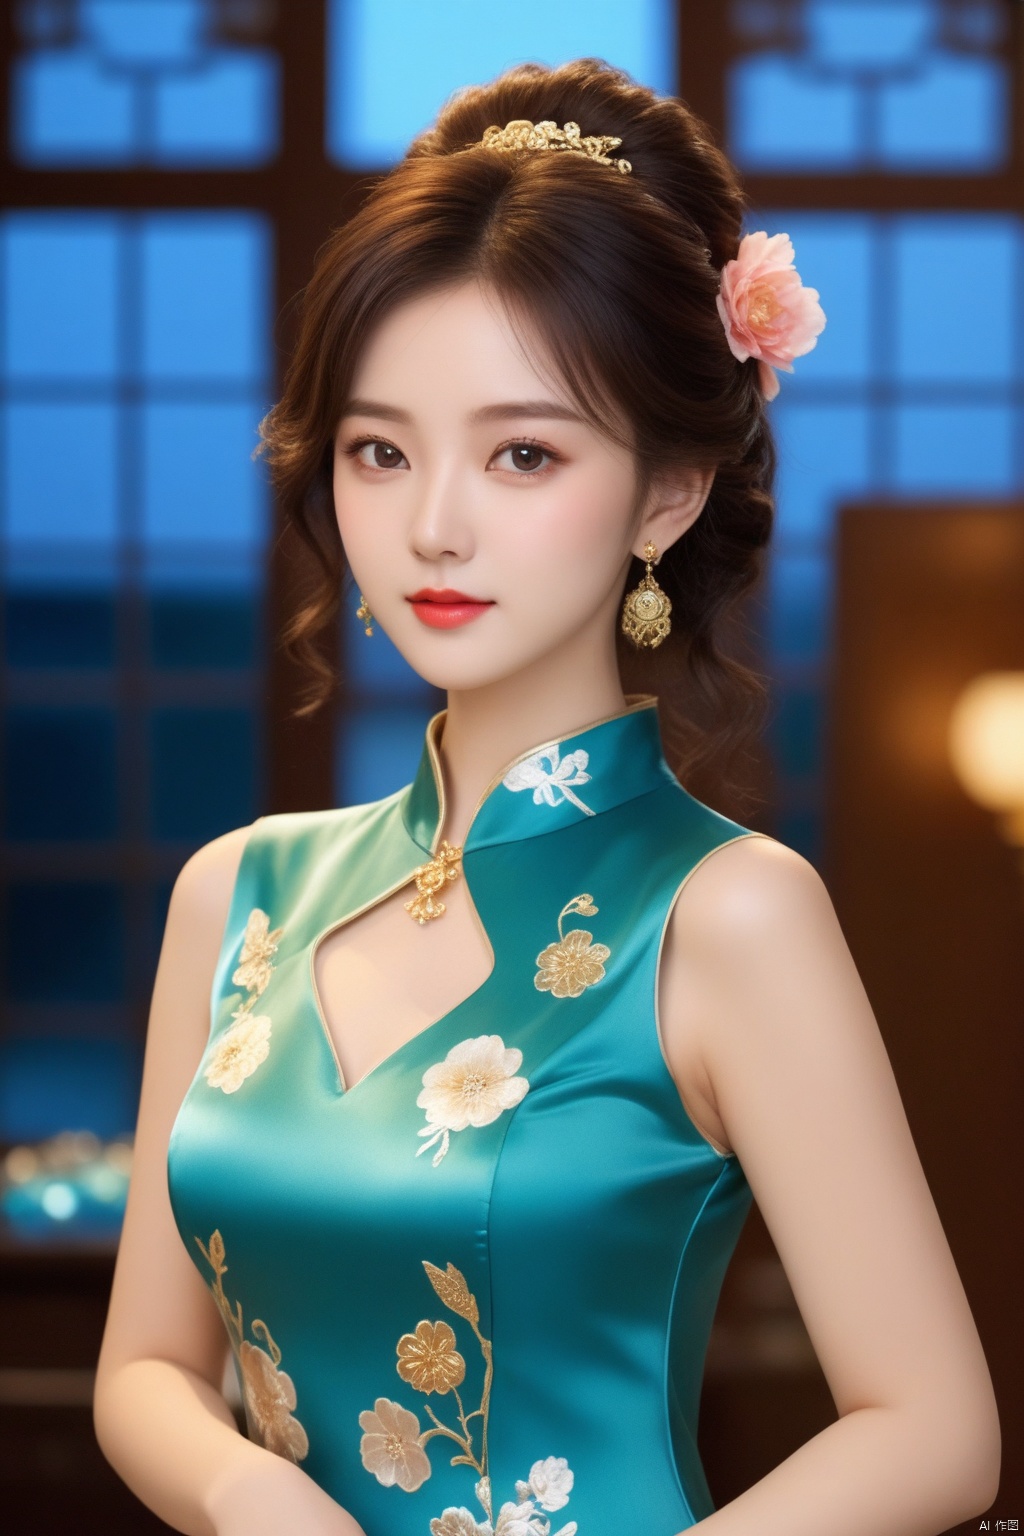  (a Busty lady),(Elegant),((cowboy_shot)), (full body photo), ((Blue printed satin short-sleeved cheongsam)), Long skirt with side slit, ((Long curly hair)), ((swept bangs)), ((Floral Hairpin)), ((Pearl necklace)), (((Pendant earrings made of gold))),(((engagement ring))),(((A bracelet made of jade))), ((A lady stands in the living room)),(At night, warm and soft lighting),
, ((poakl)),